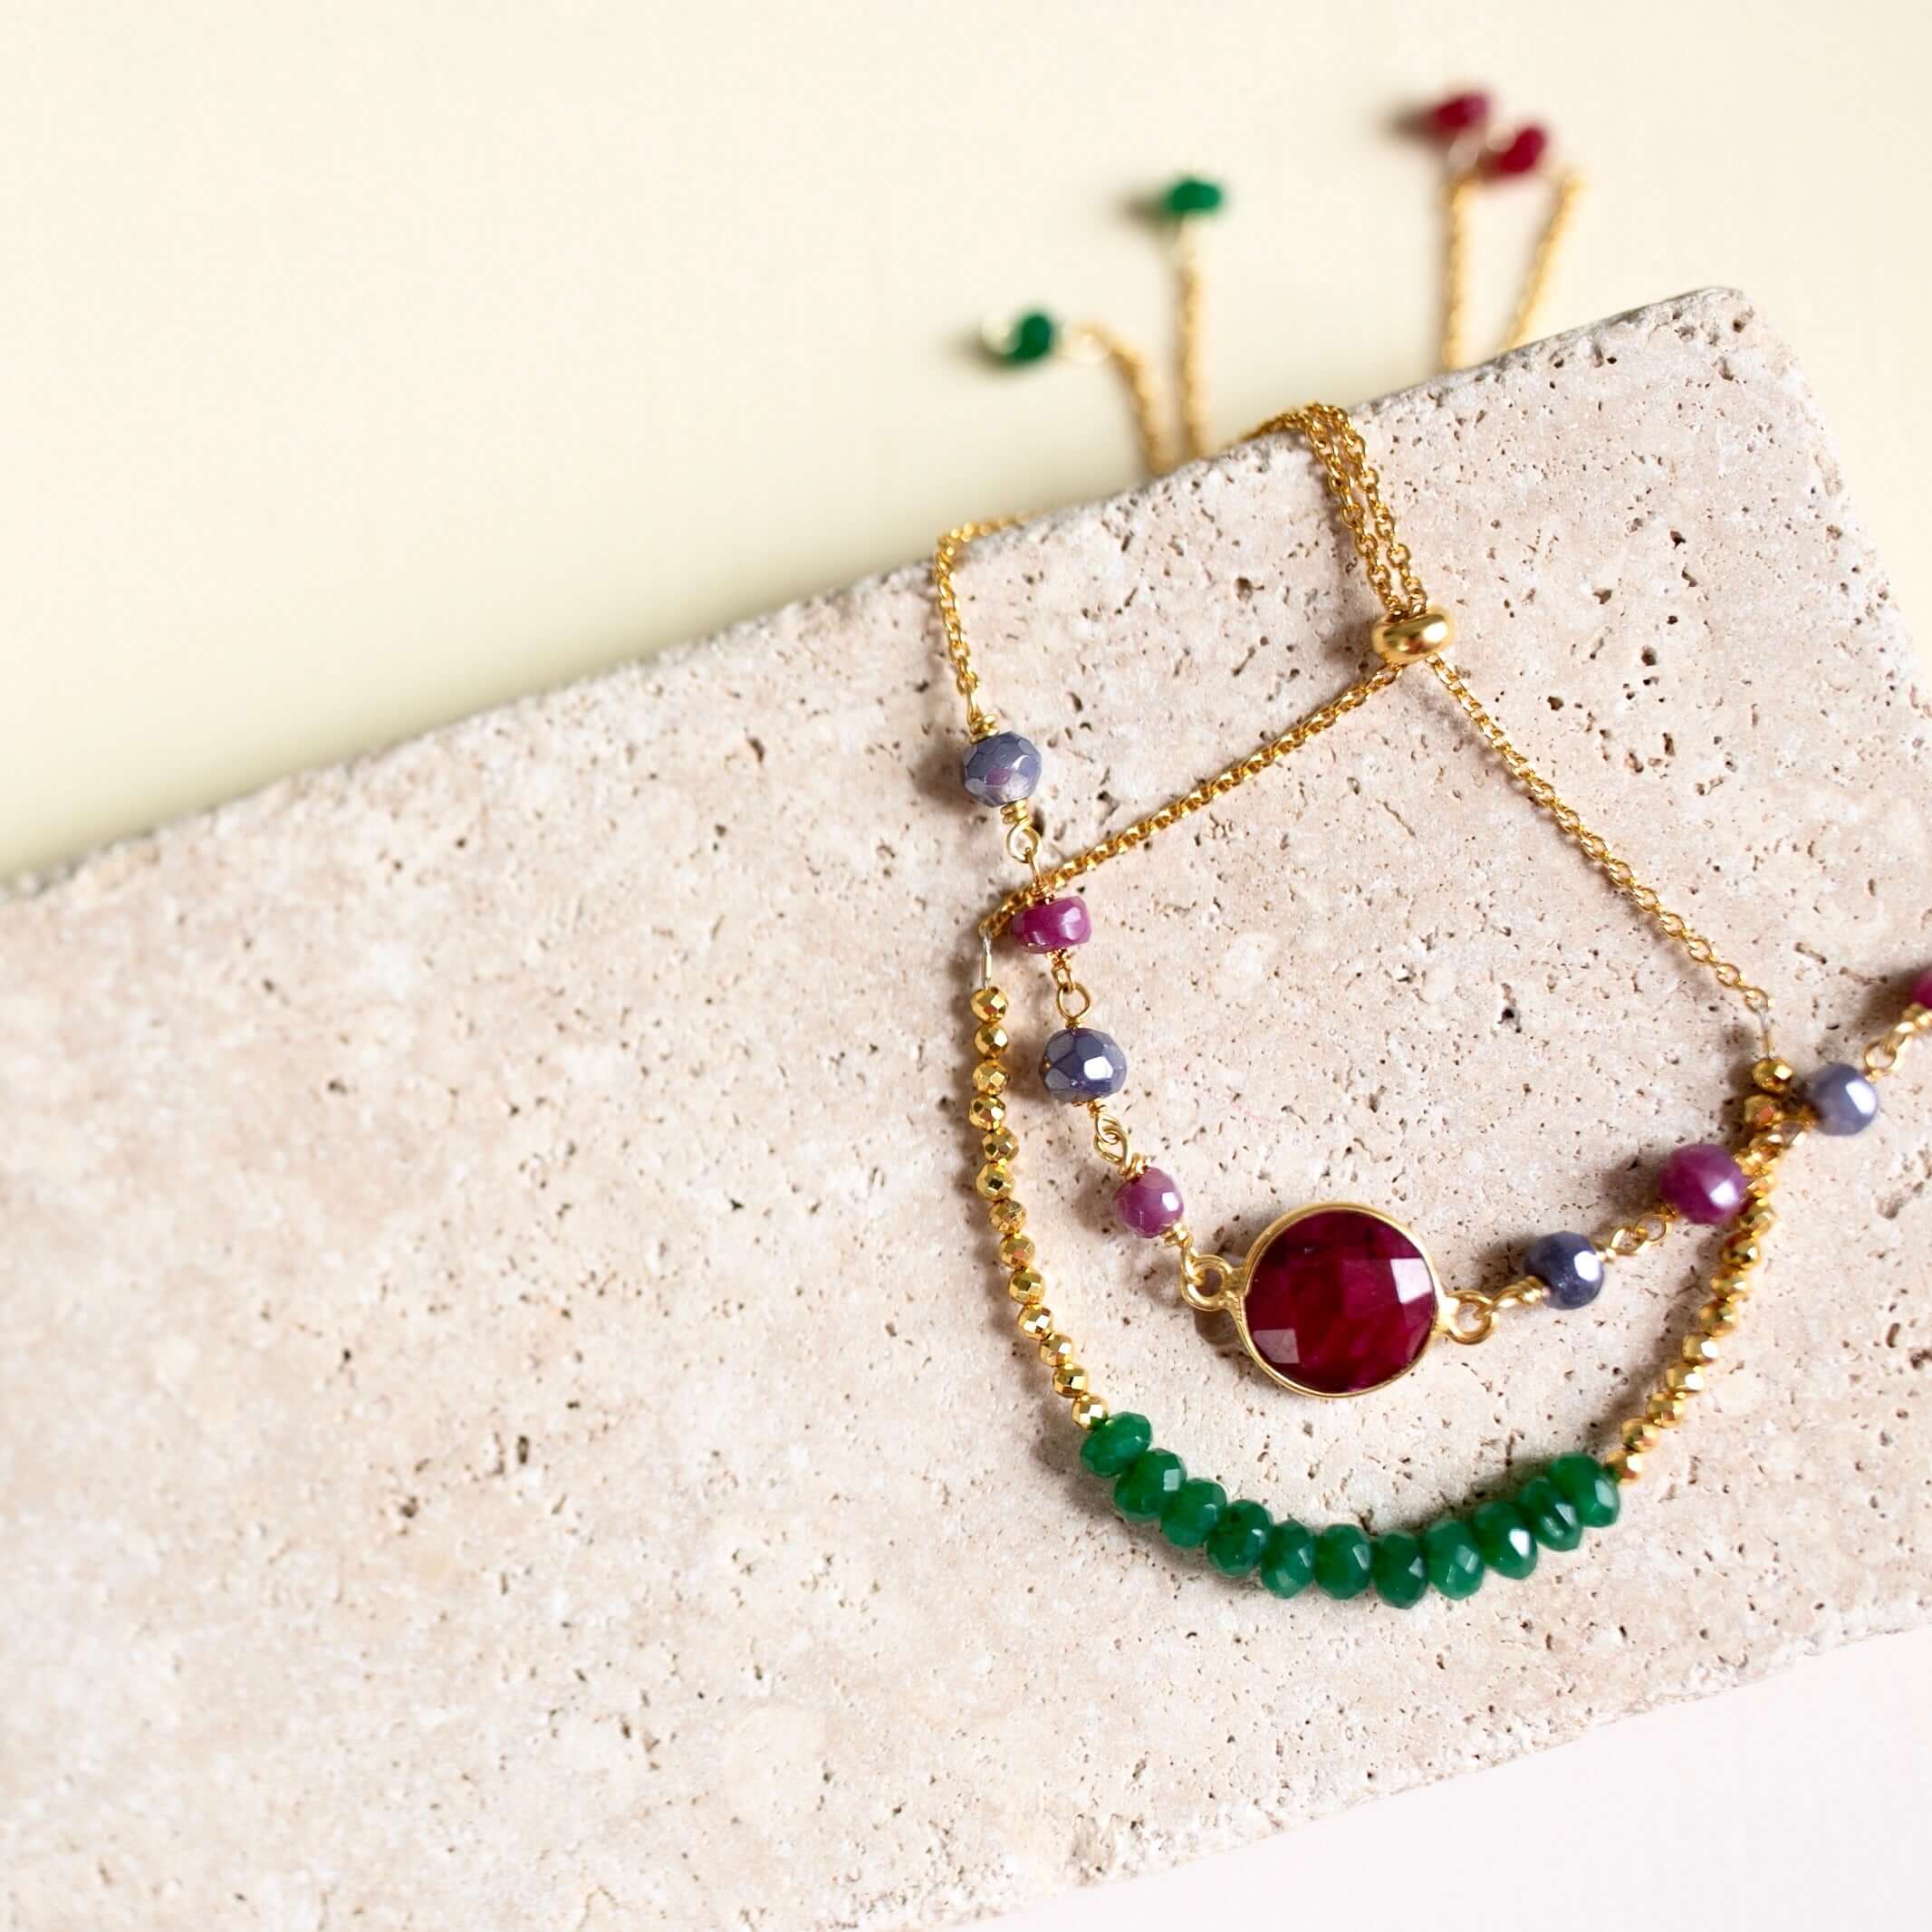 Gold-Plated Chain Bracelets Adorned with Authentic GemStones